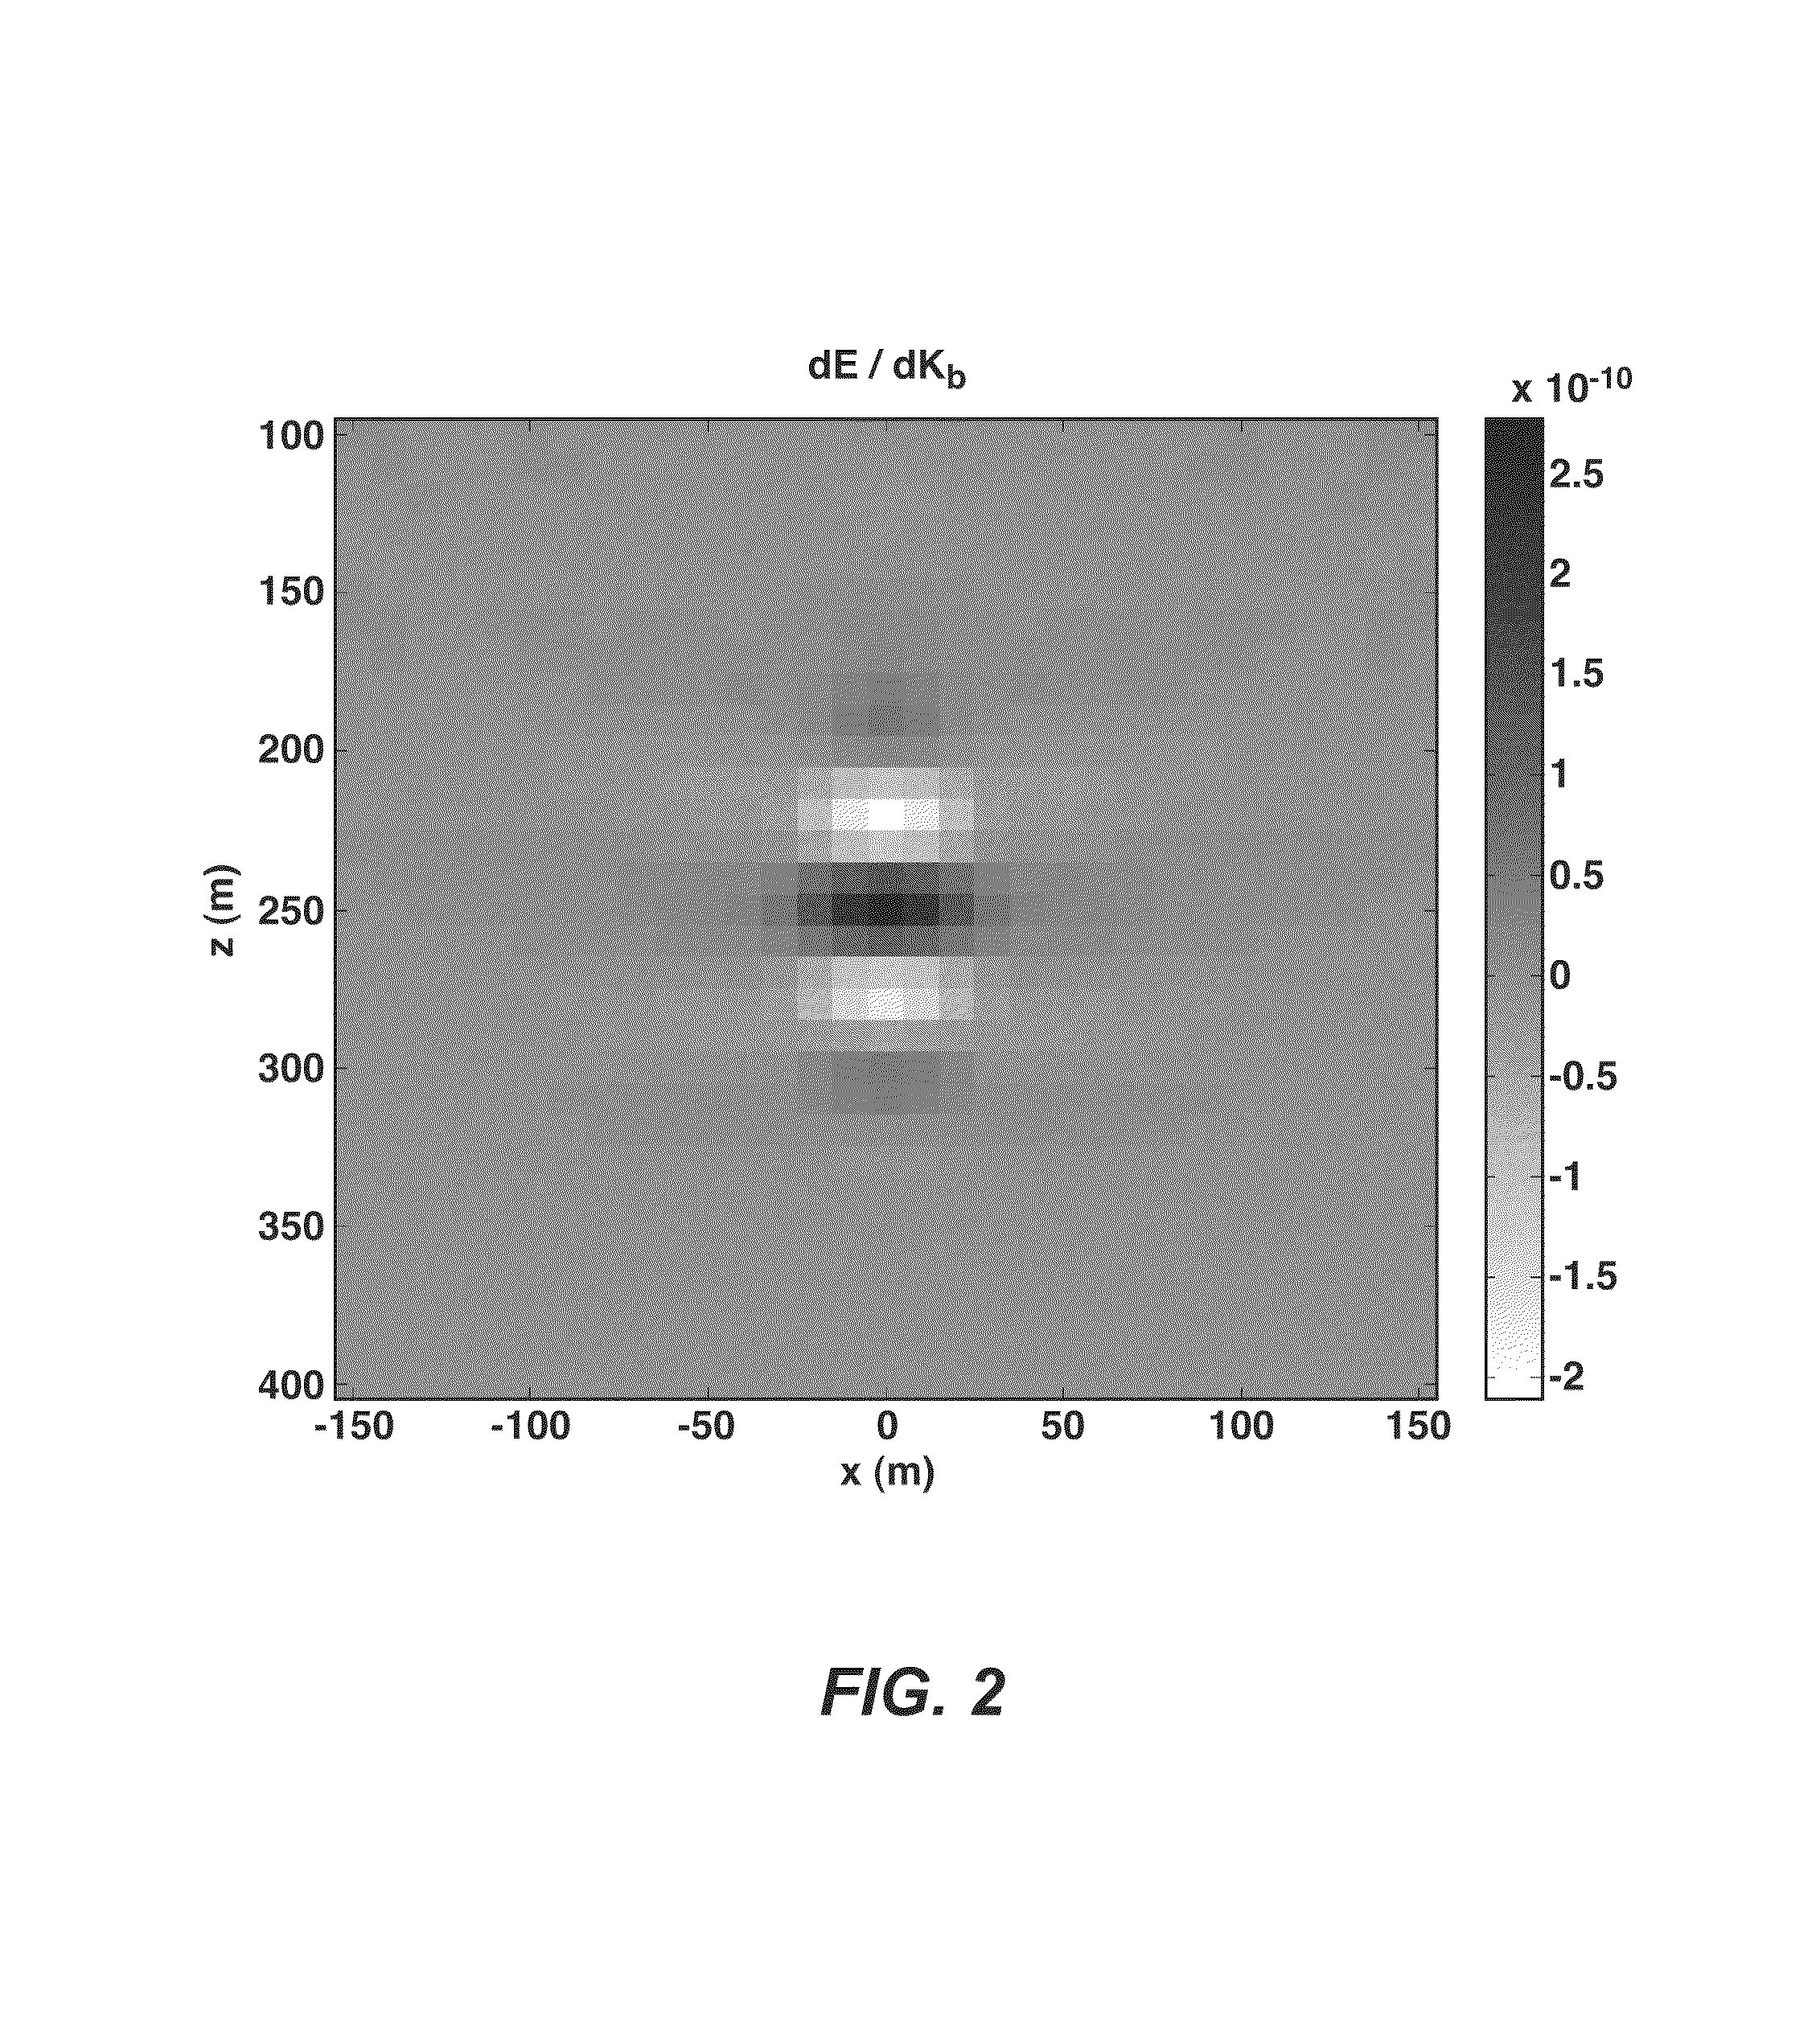 Methods for subsurface parameter estimation in full wavefield inversion and reverse-time migration